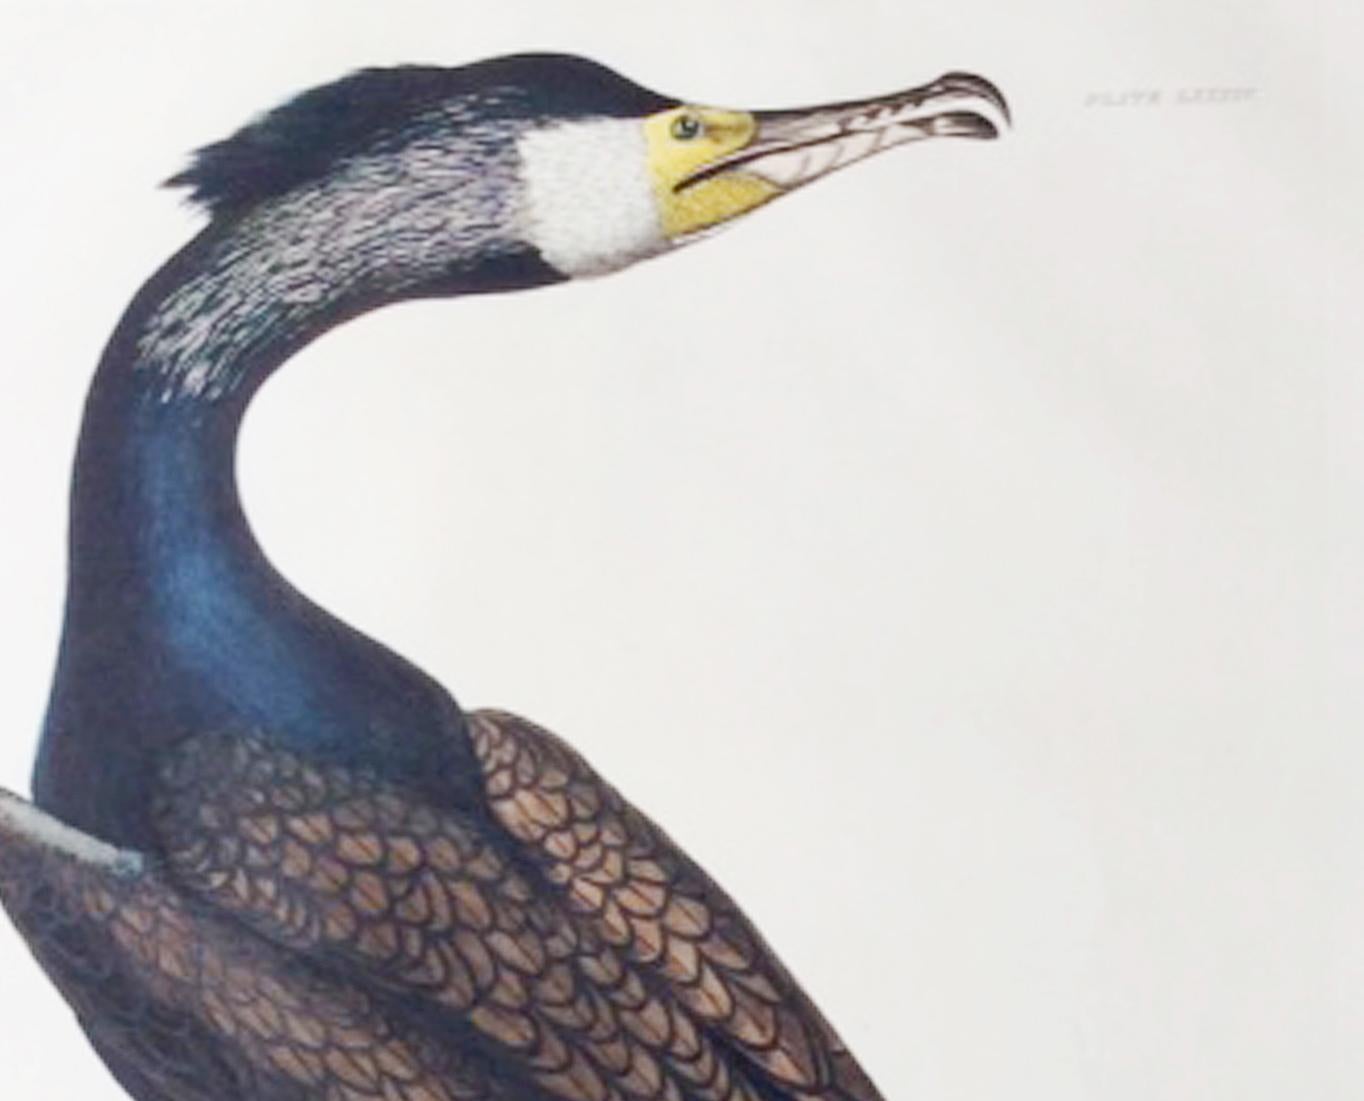 Prideaux John Selby large hand-colored copper plate engraving of a cormorant,
early 19th century

We have a second cormorant to match.

Engravings of British birds, with original hand coloring, paper watermarked “J Whatman” from:
Illustrations